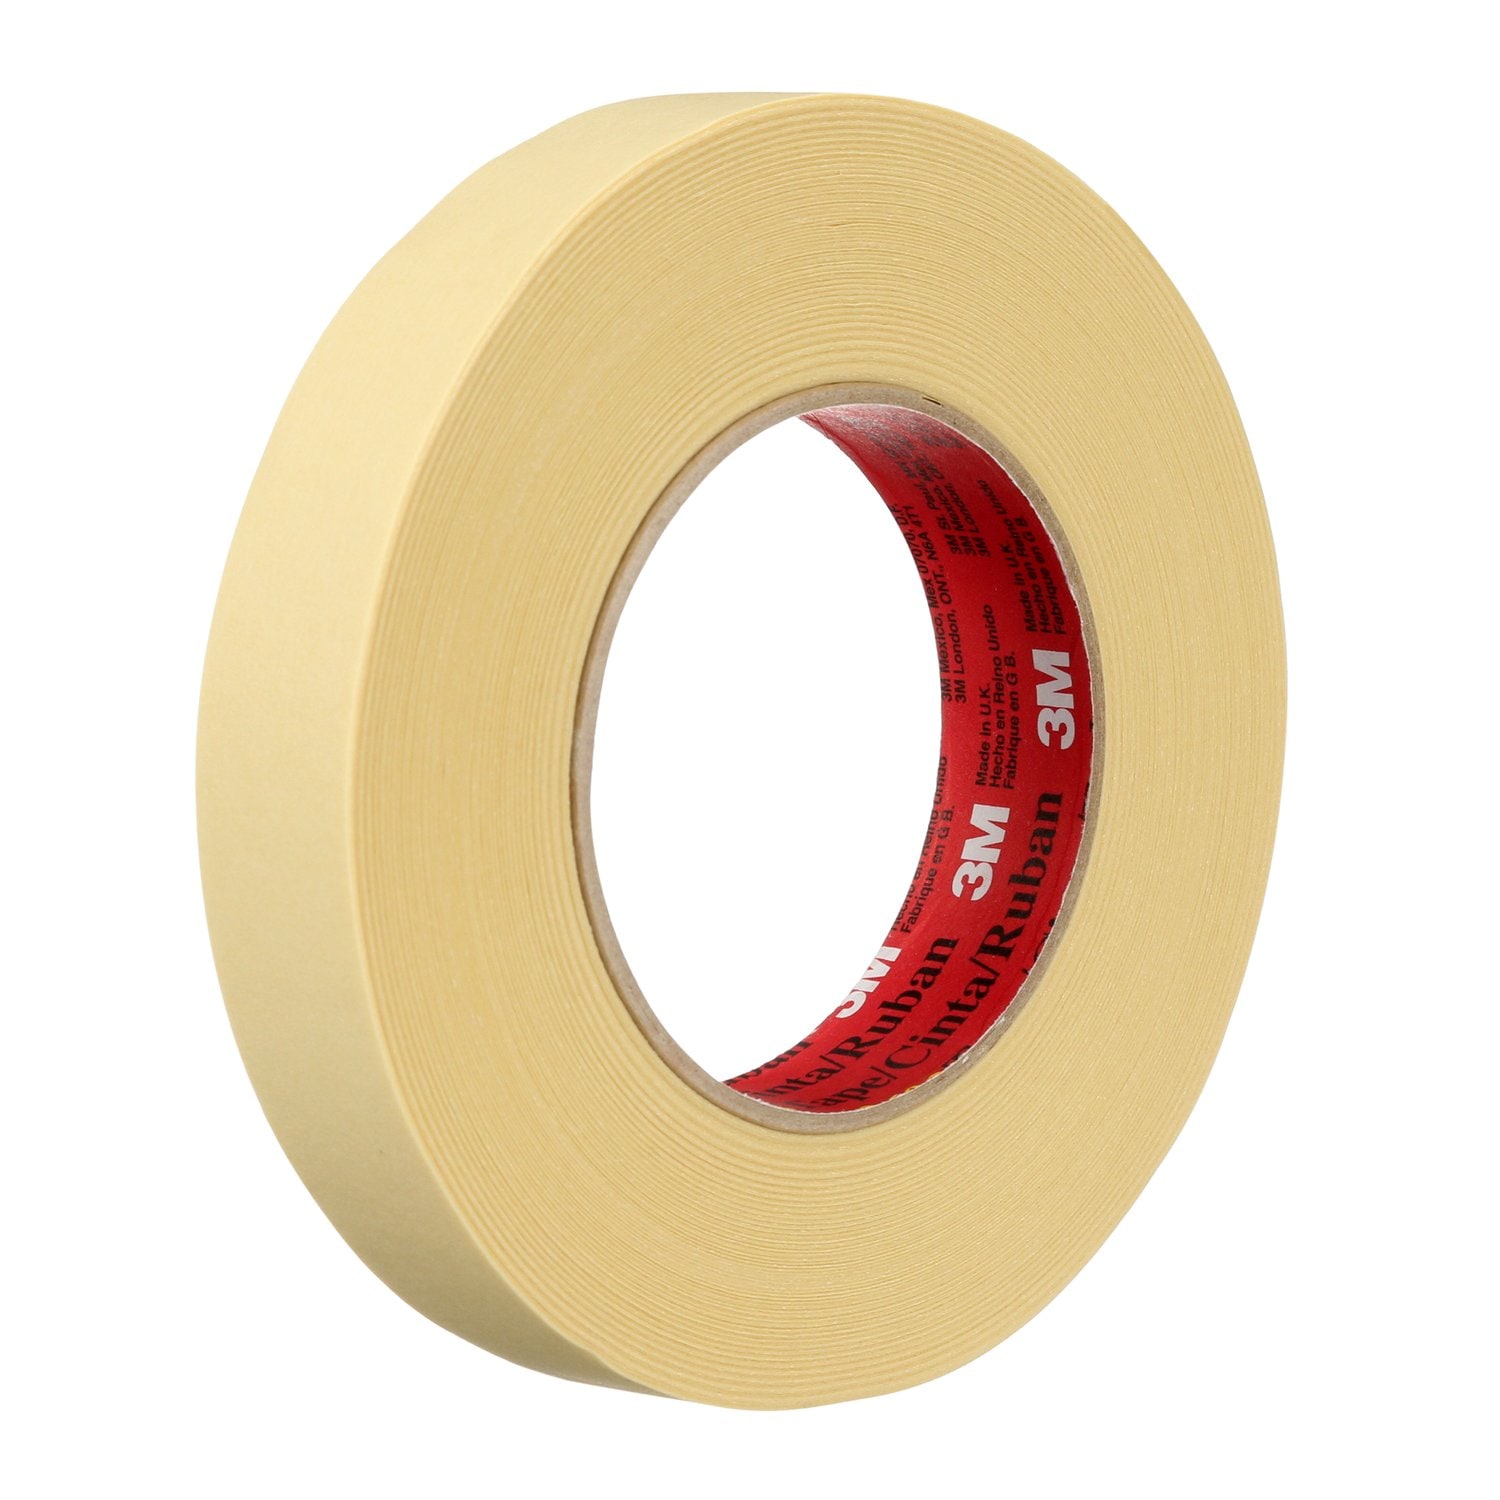 DEART 8 Colorful Rolls of Masking Tape - 1 inch x 11 Yard